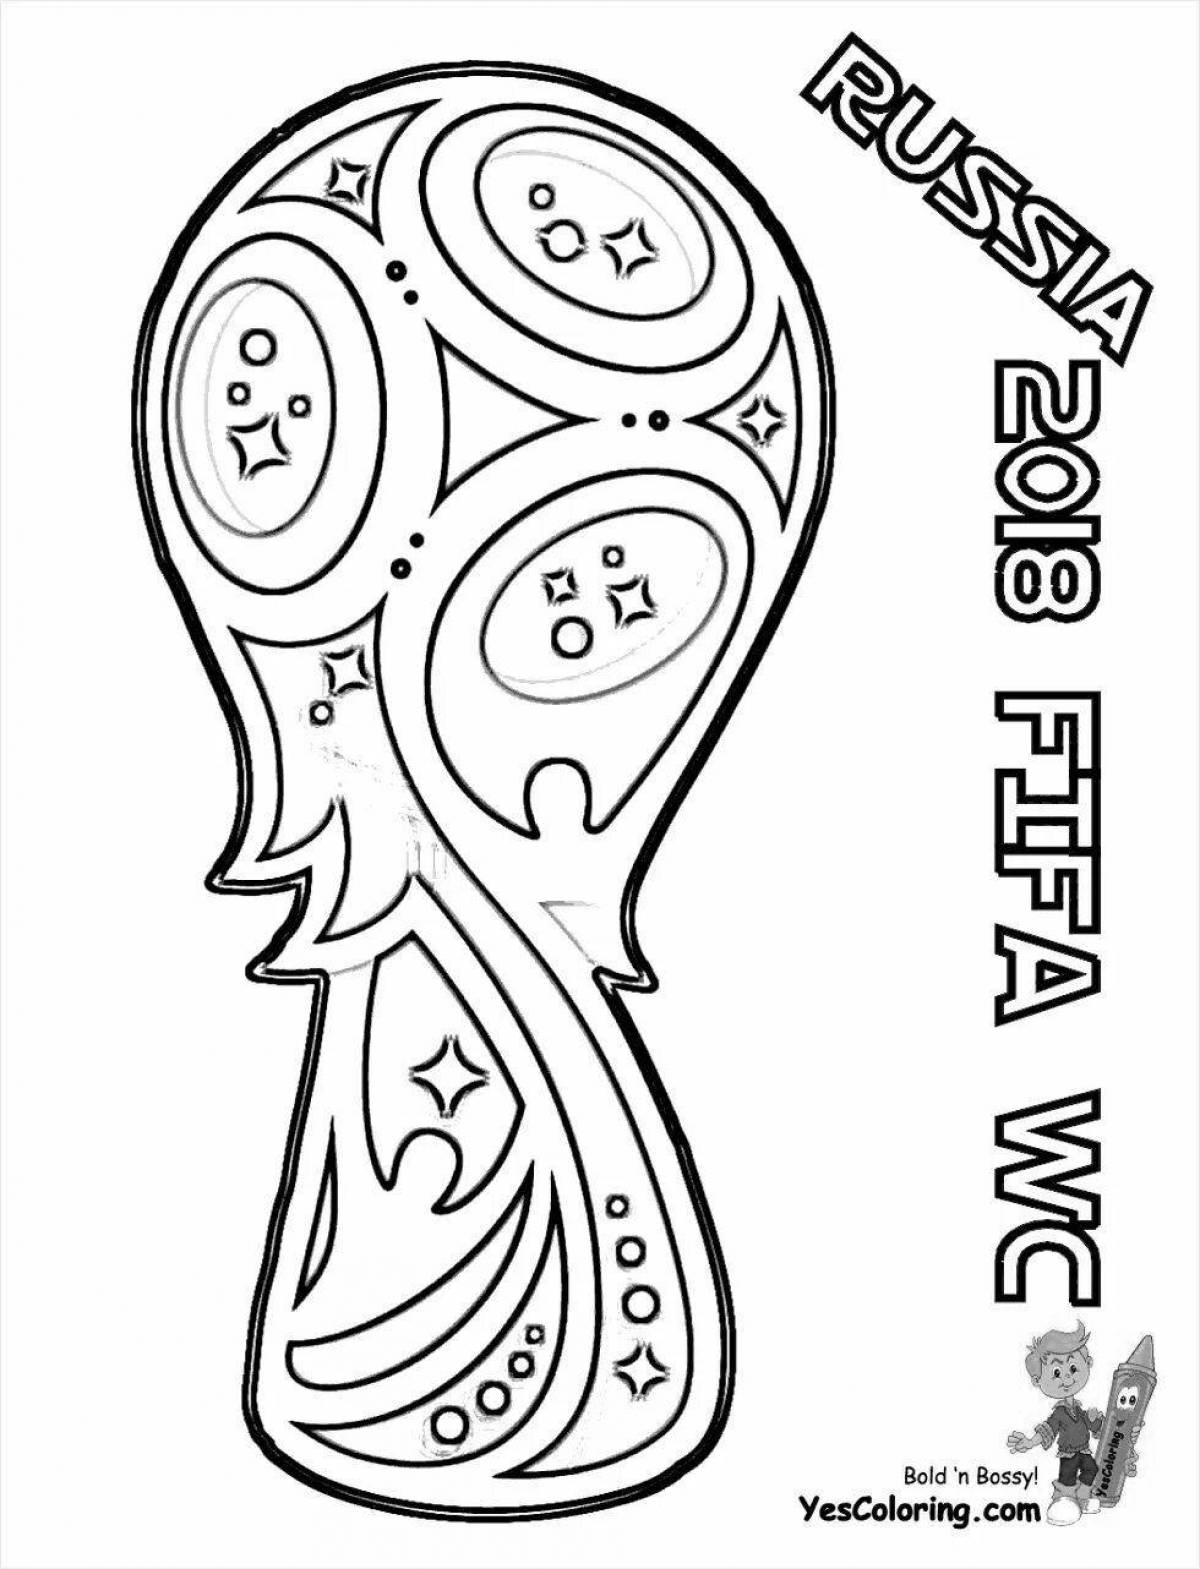 Playful soccer cup coloring page